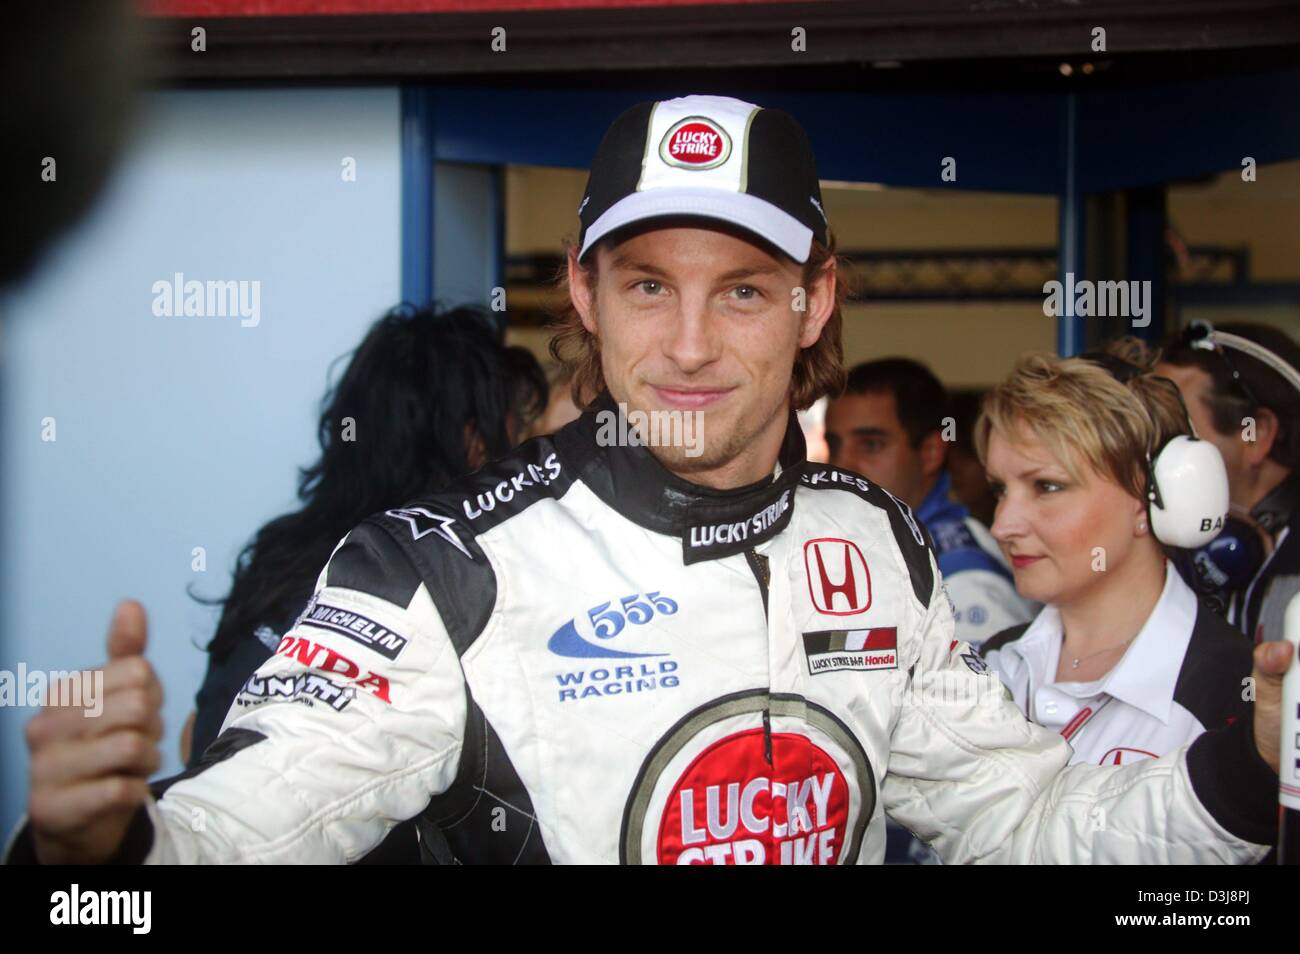 (dpa) - English Formula One pilot Jenson Button (Team BAR-Honda) smiles after winning his first ever pole position at the San Marino Grand Prix in Imola, Italy, 24 April 2004. Stock Photo